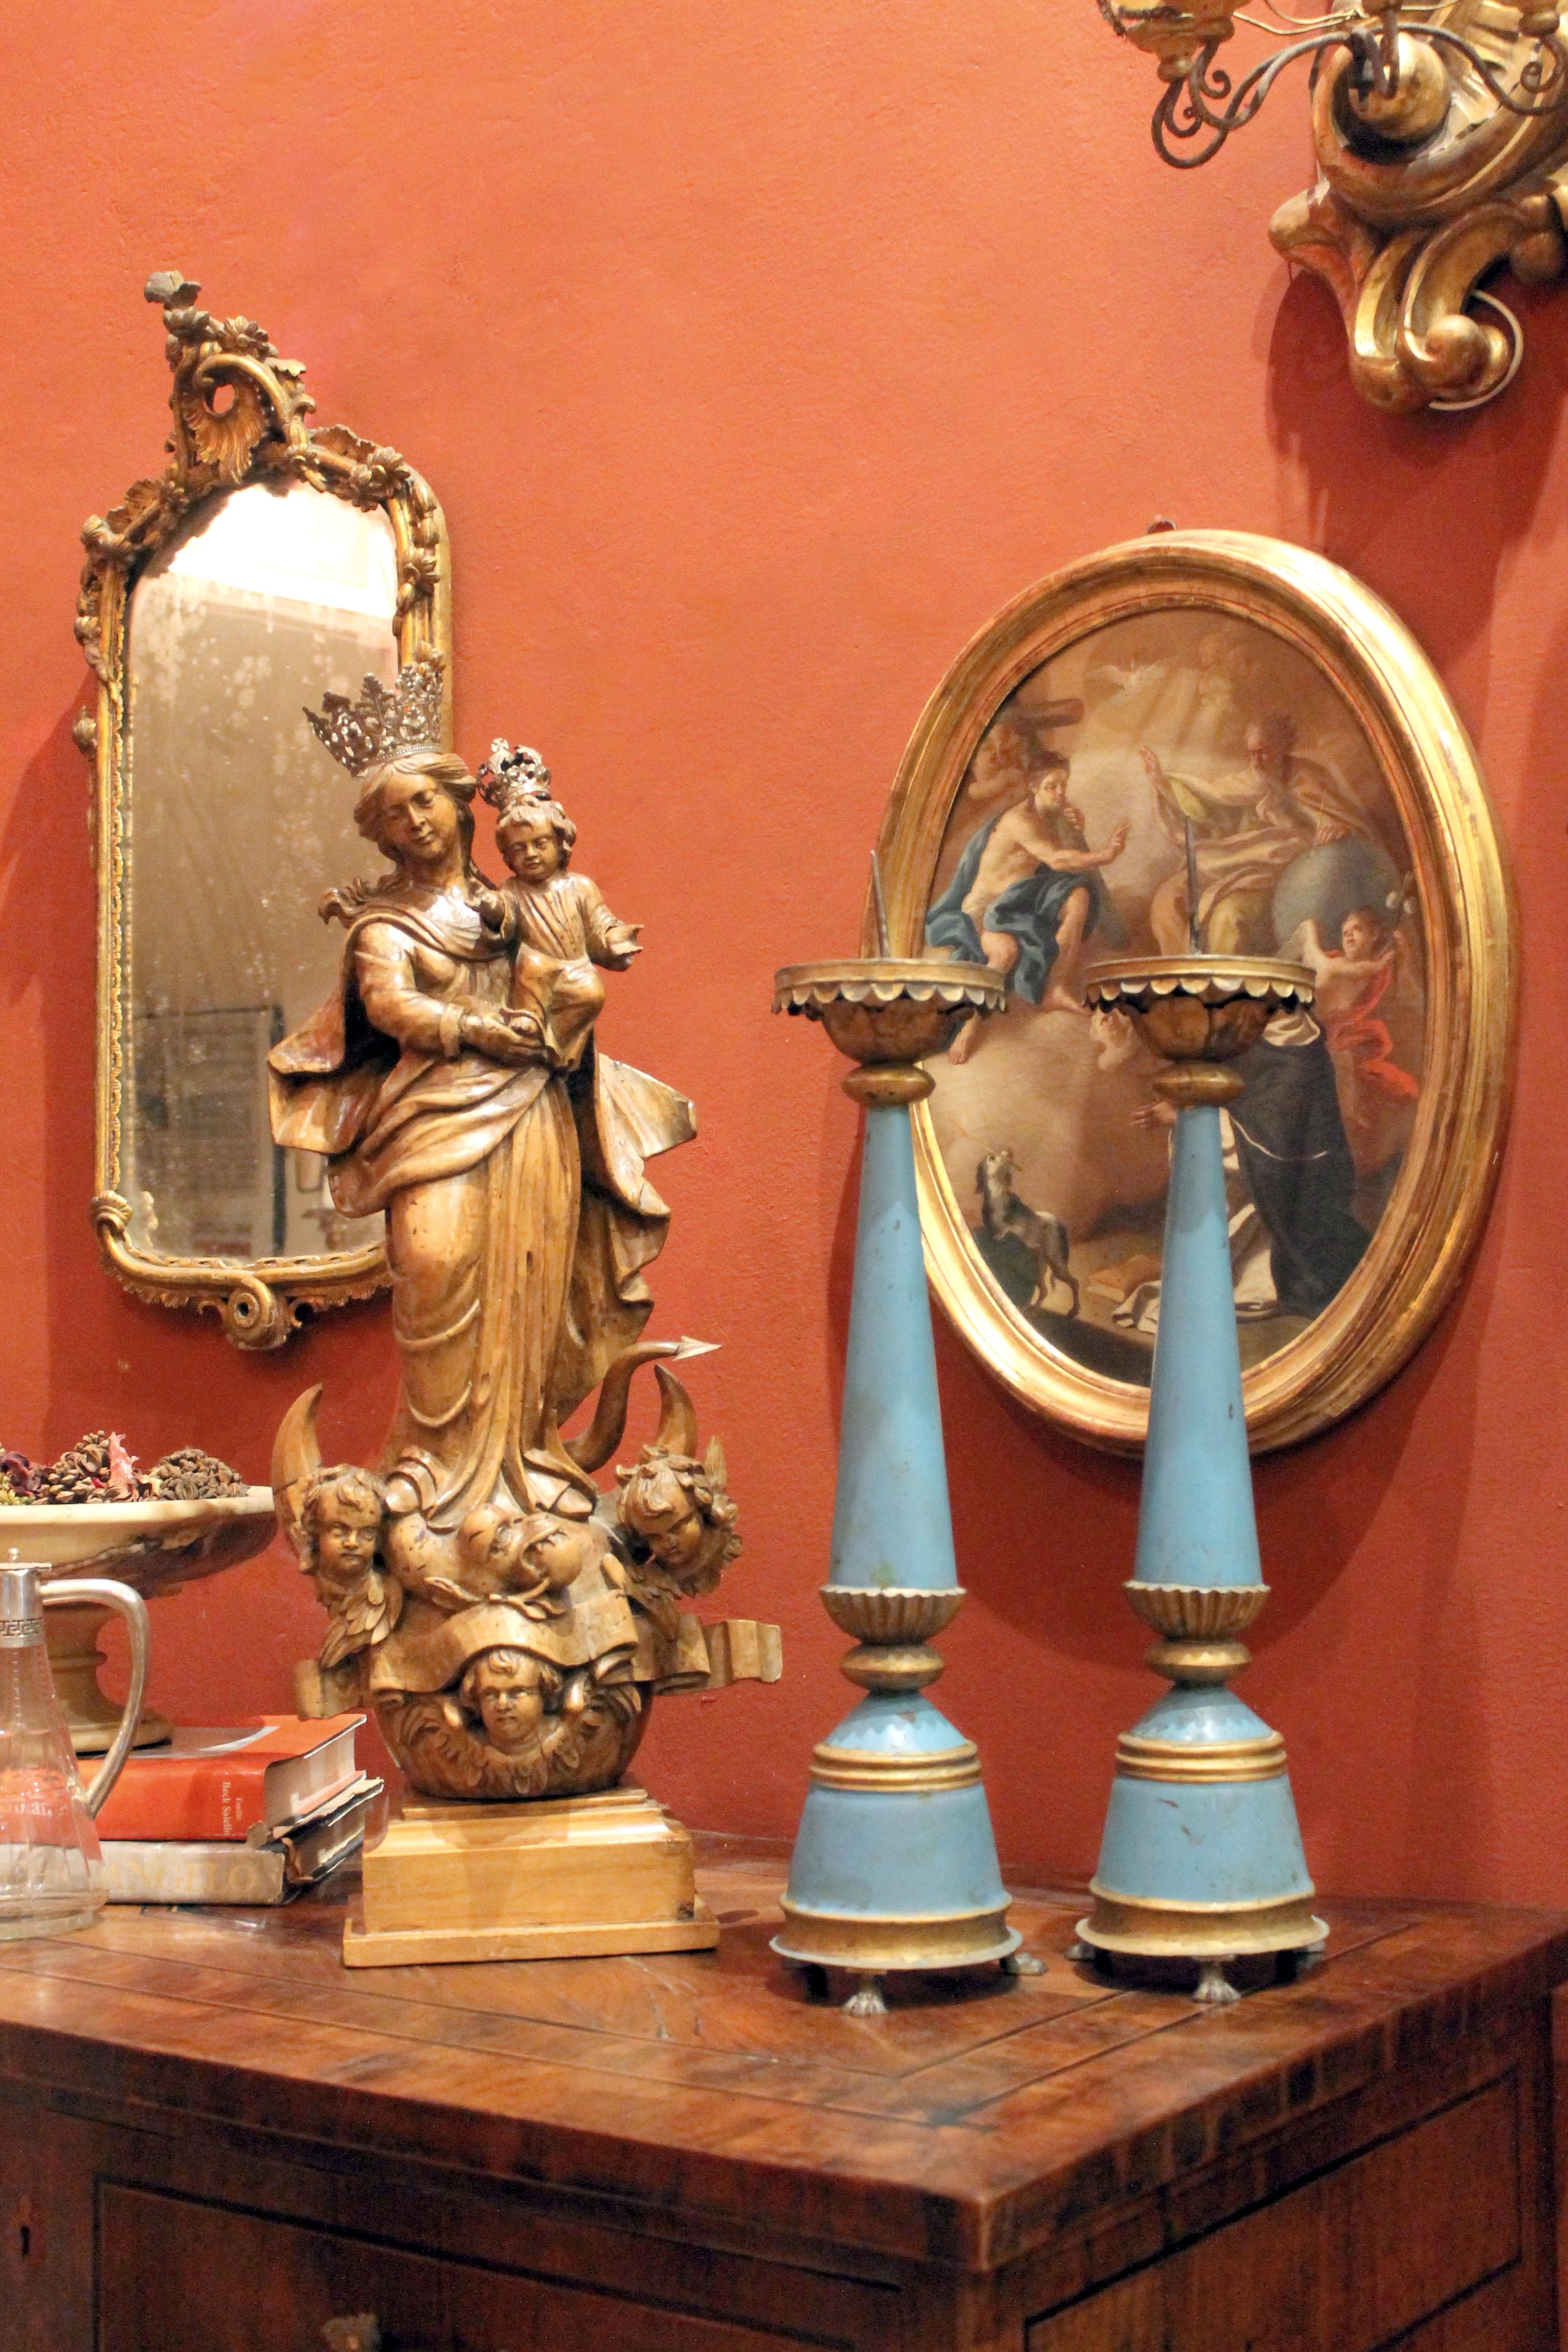 This pair of tall French 19th century blue painted tole and parcel gilt tin pricket candlesticks feature an elegant neoclassical Louis XVI shape. 
Each candleholder with inverted scalloped drip pan enriched by a foliate motif and with pricket at the